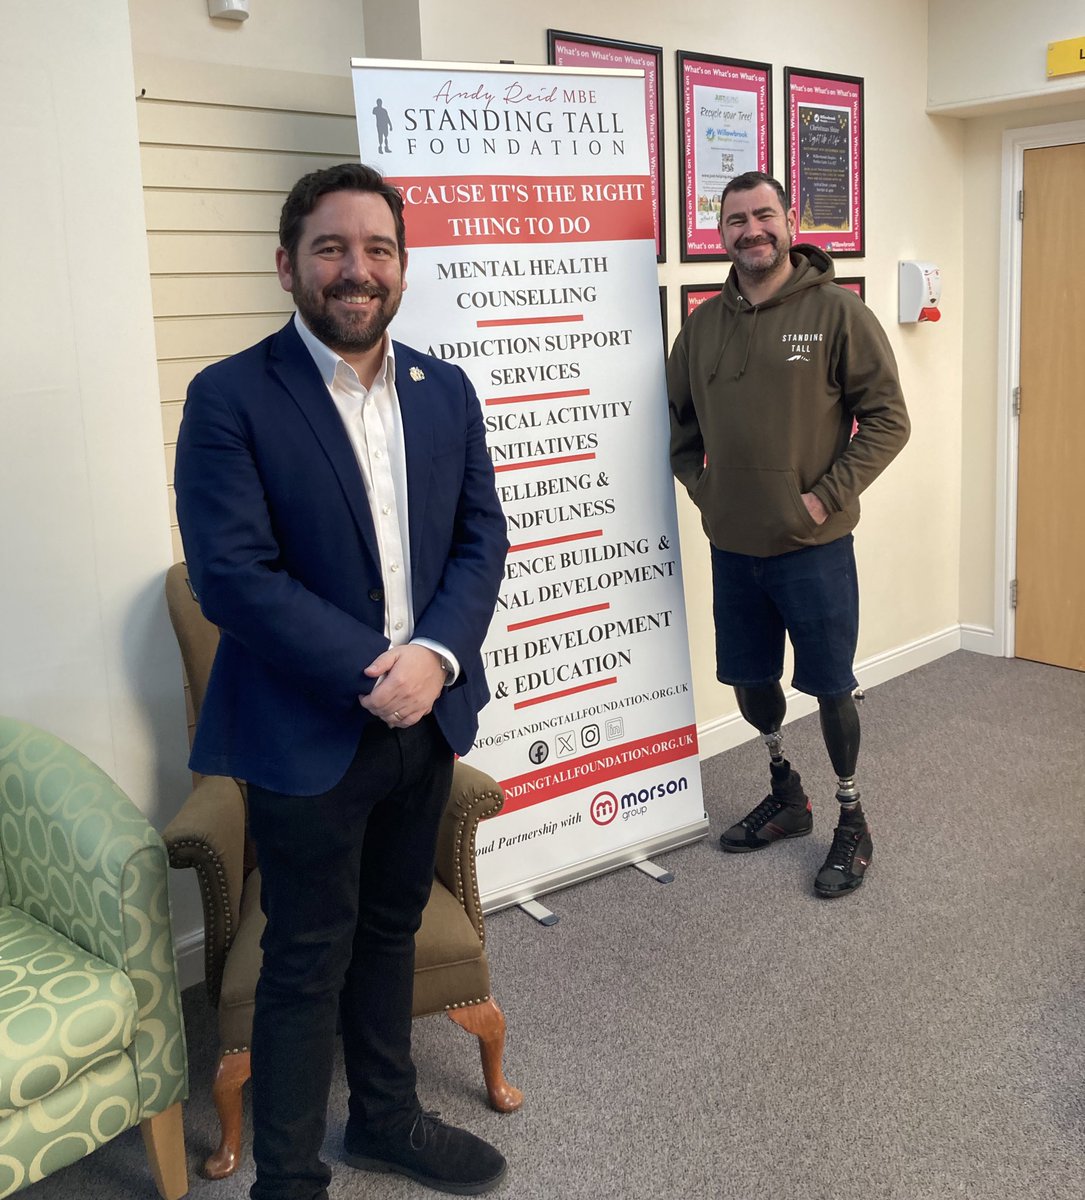 Great catch up with @andyreid2506 at @AndyReidMBE_STF this morning. The Standing Tall Foundation does amazing work, offering a huge range of support to veterans and the wider community. Find out more about them and what they do 👉 standingtallfoundation.org.uk